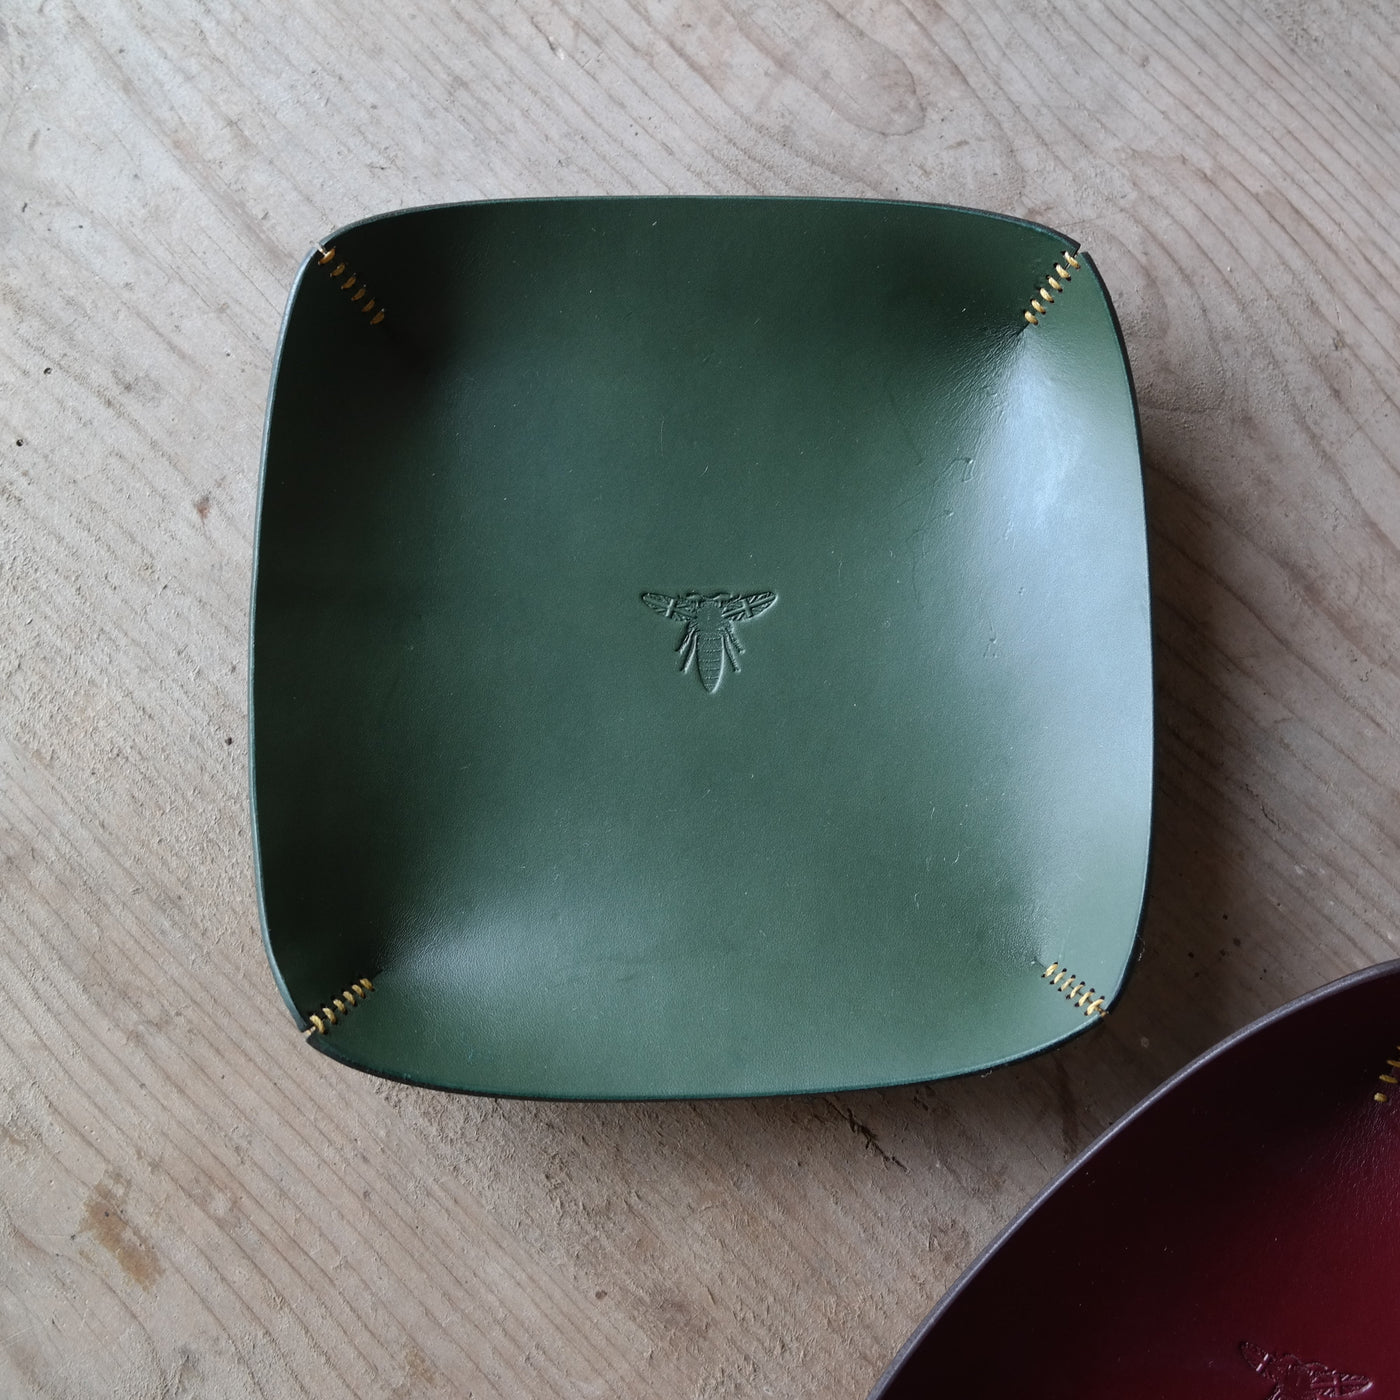 Limited edition leather coin tray in dark green